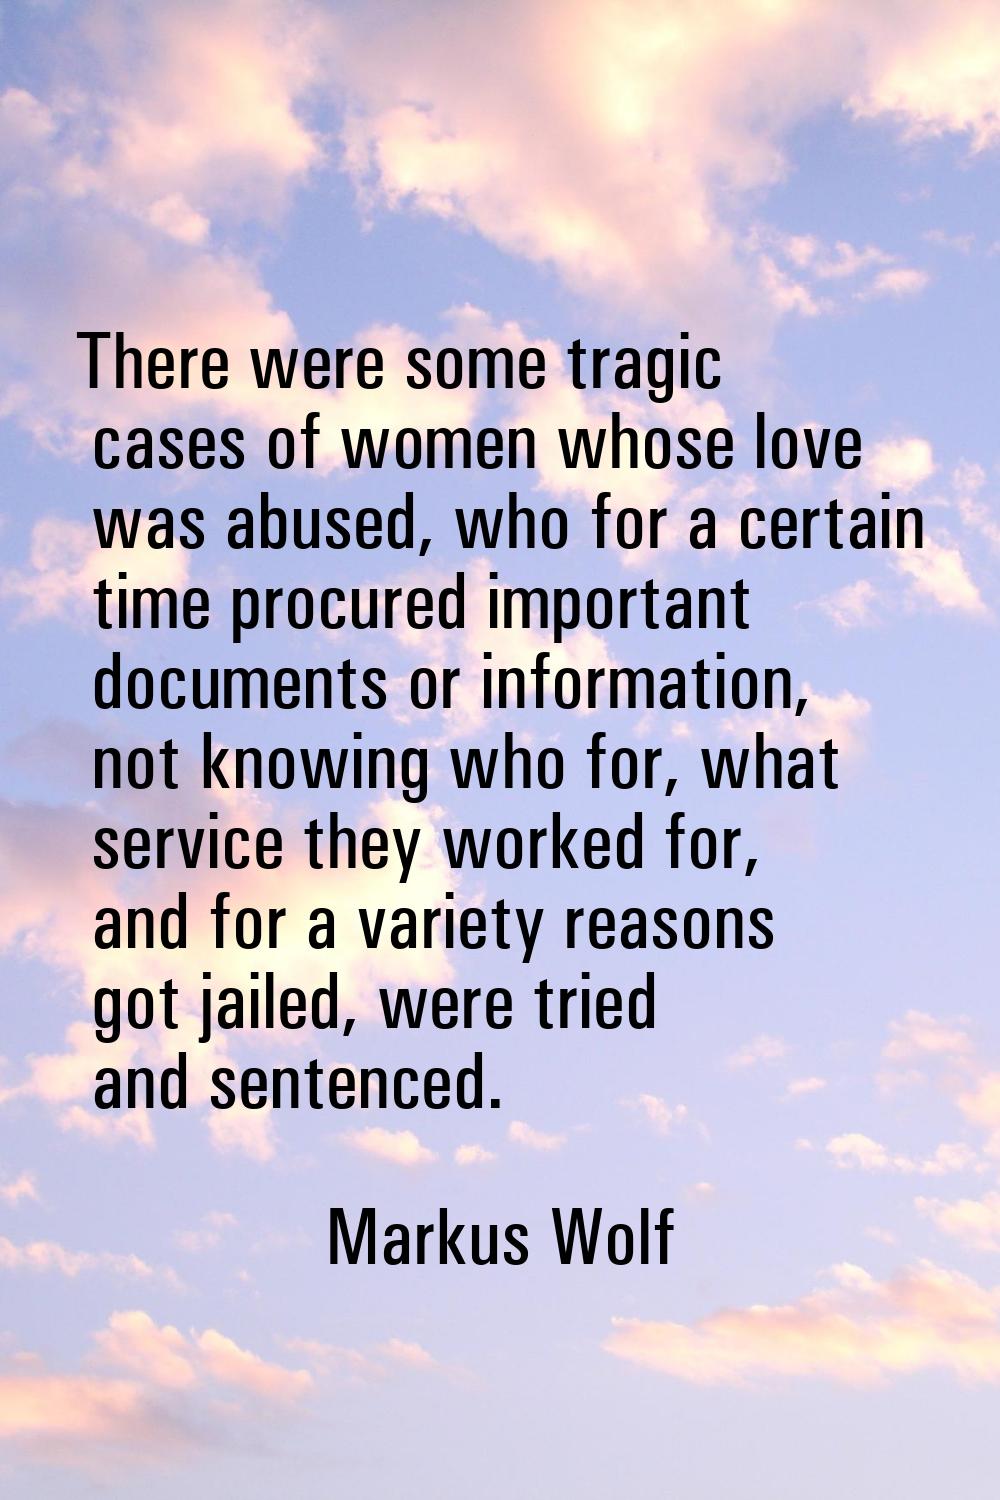 There were some tragic cases of women whose love was abused, who for a certain time procured import